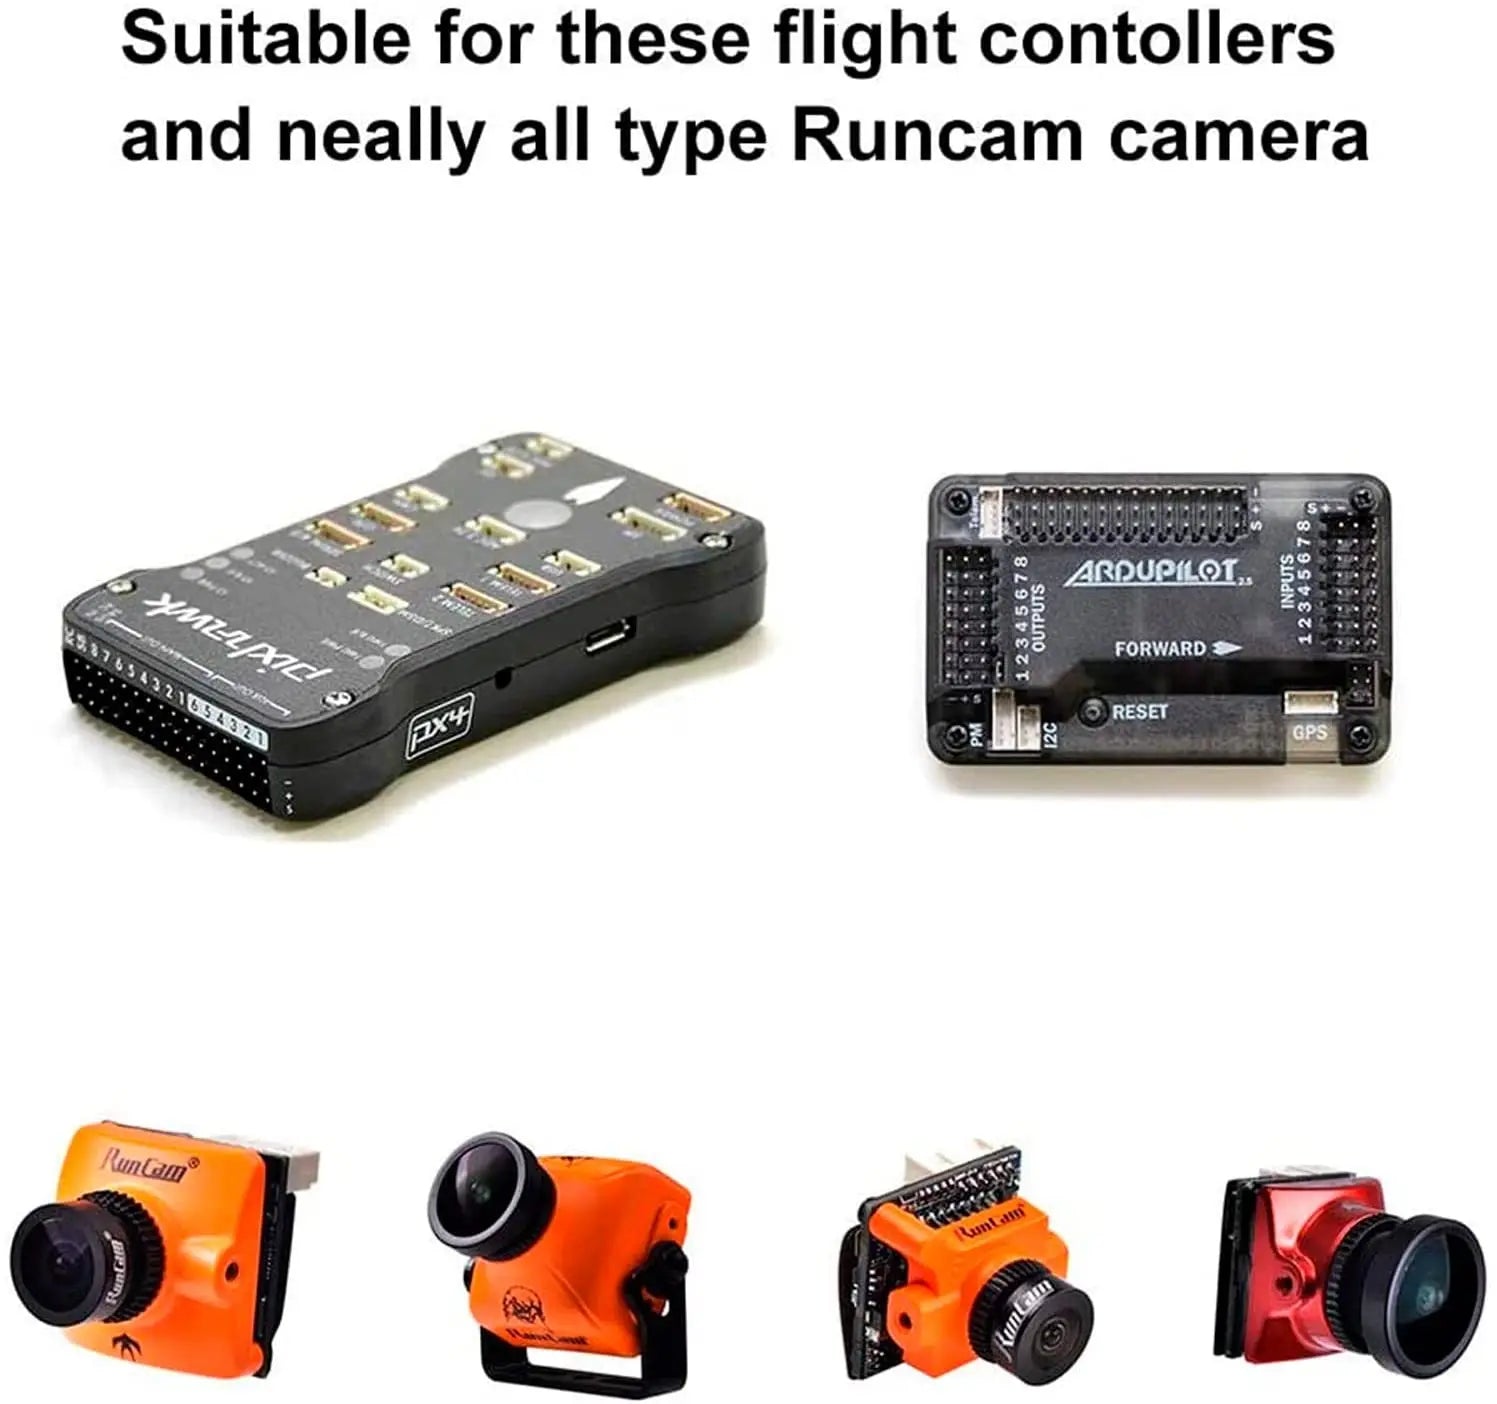 Suitable for these flight contollers and neally all type Runcam camera